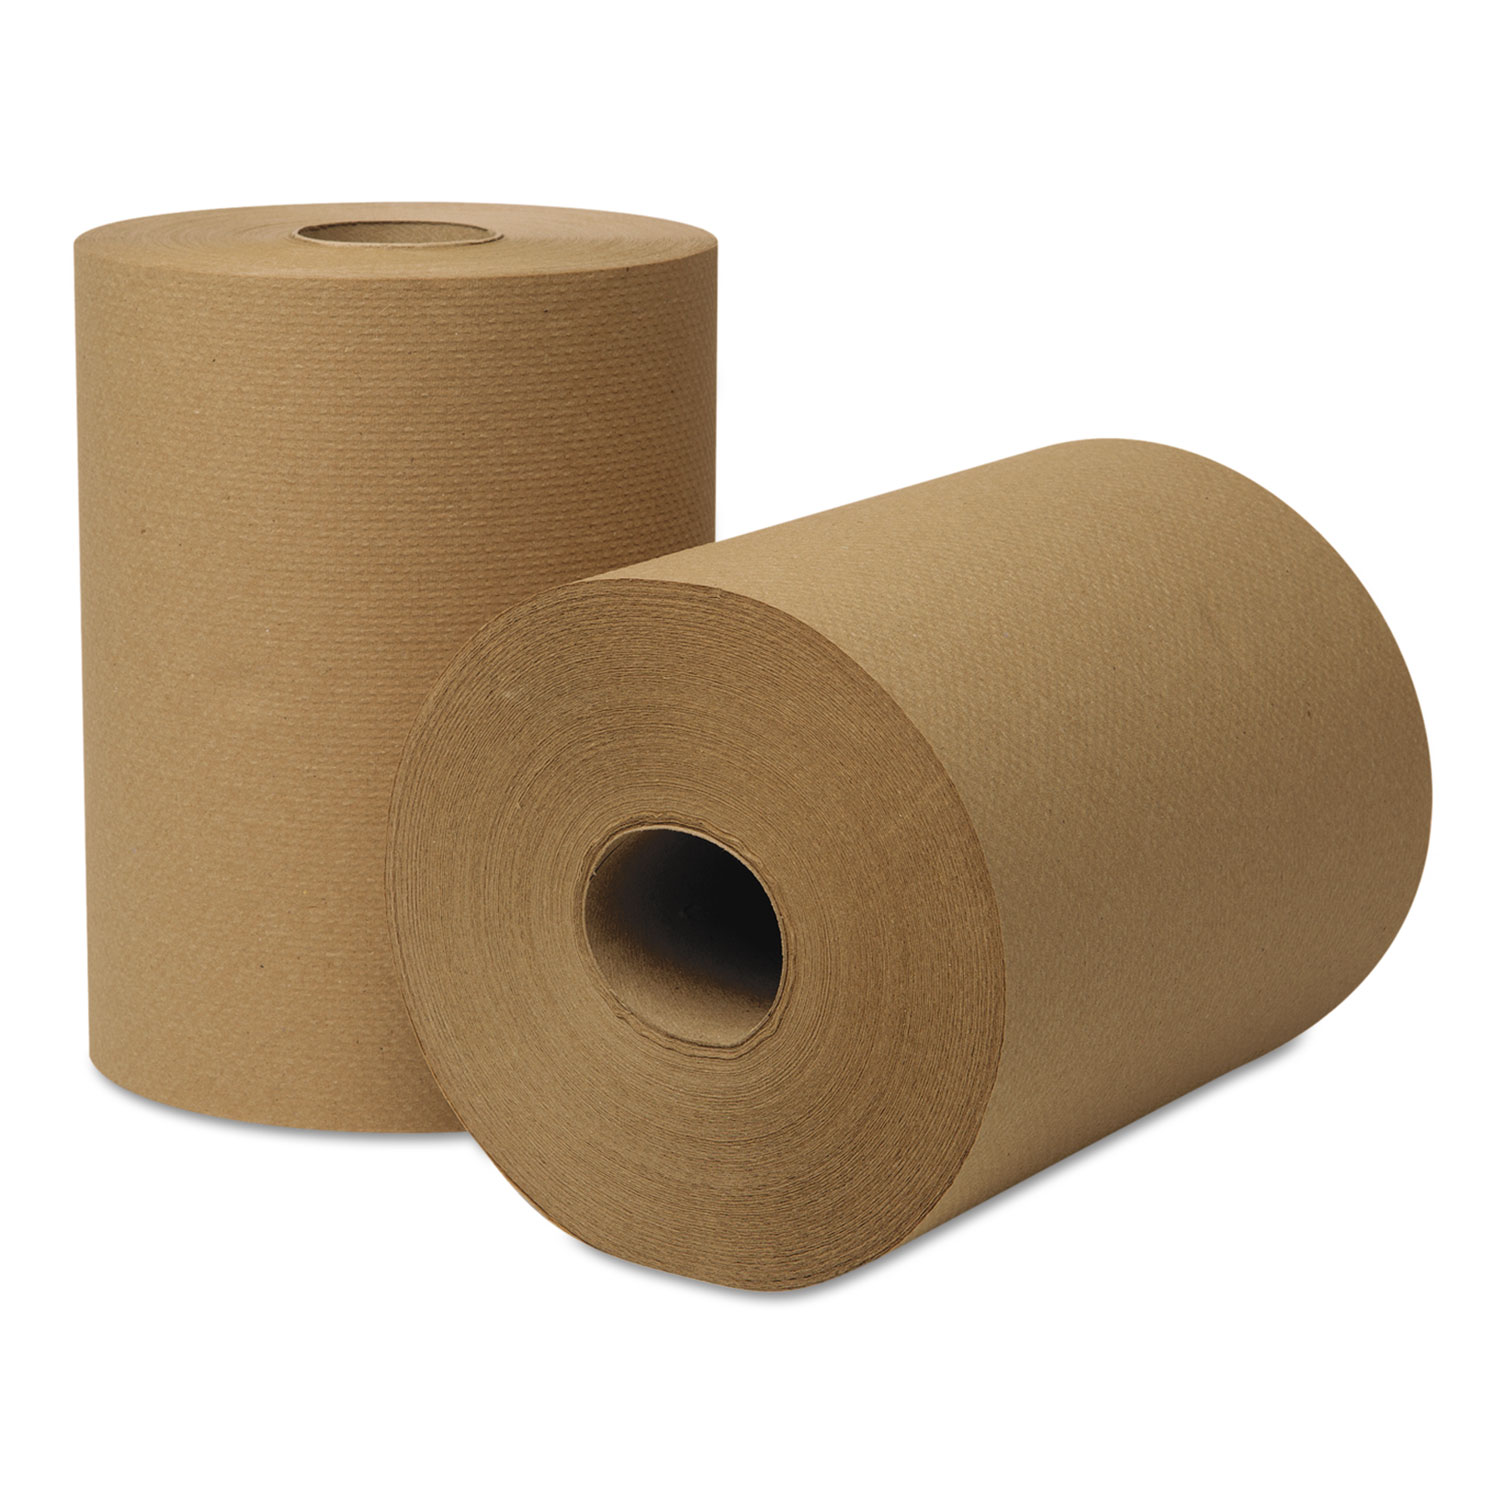 EcoSoft Hardwound Roll Towels, 350 ft x 8 in, Natural, 12 Rolls/Carton